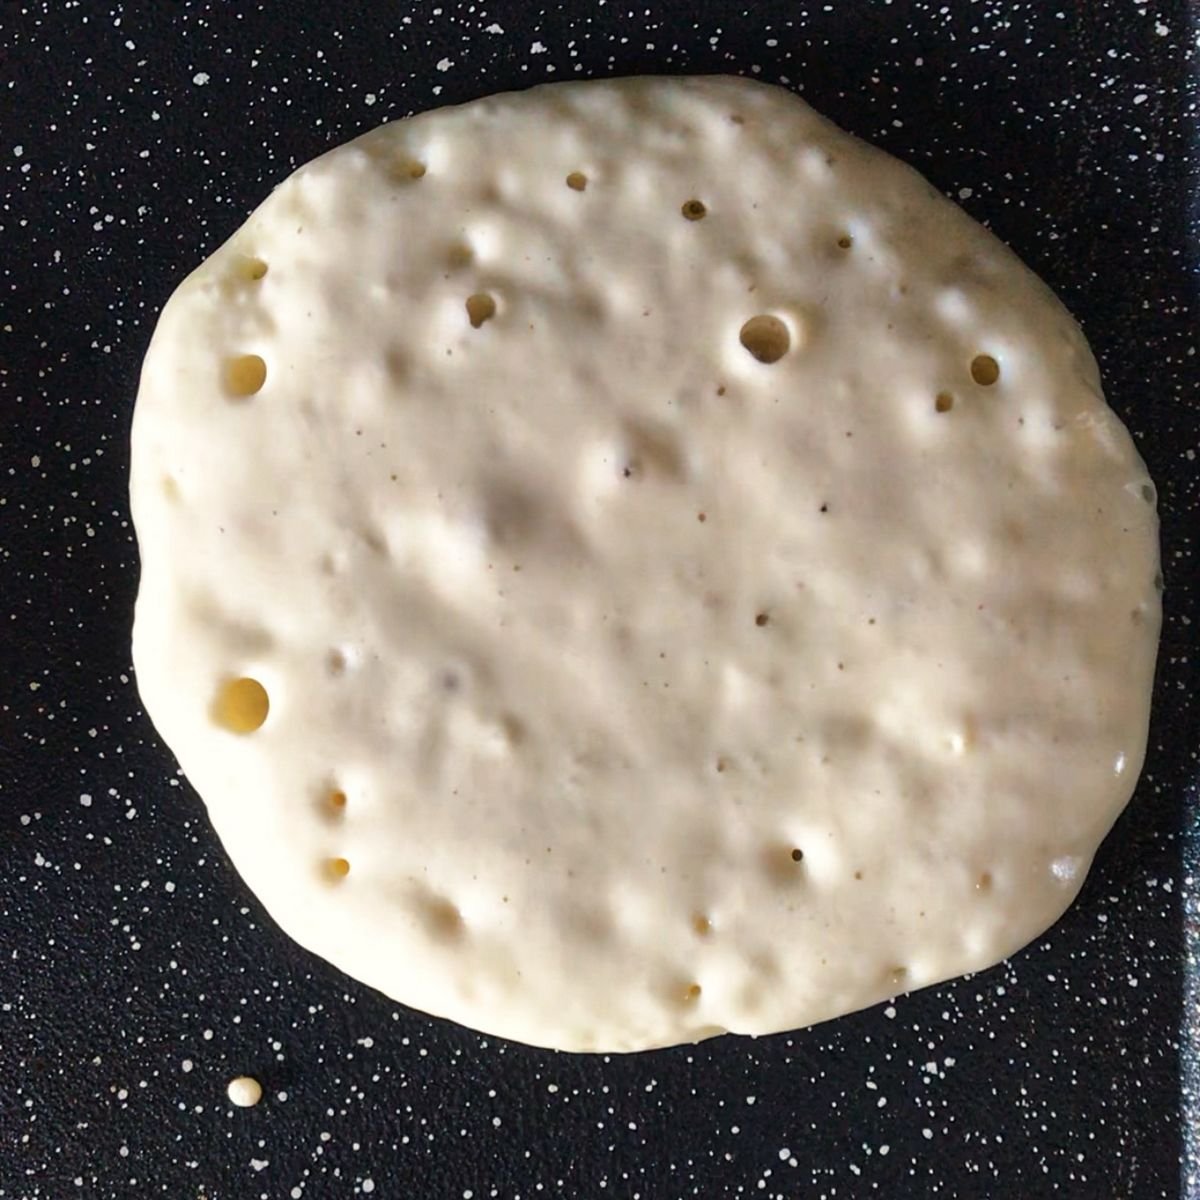 Air bubbles surfacing to the top of a pancake.